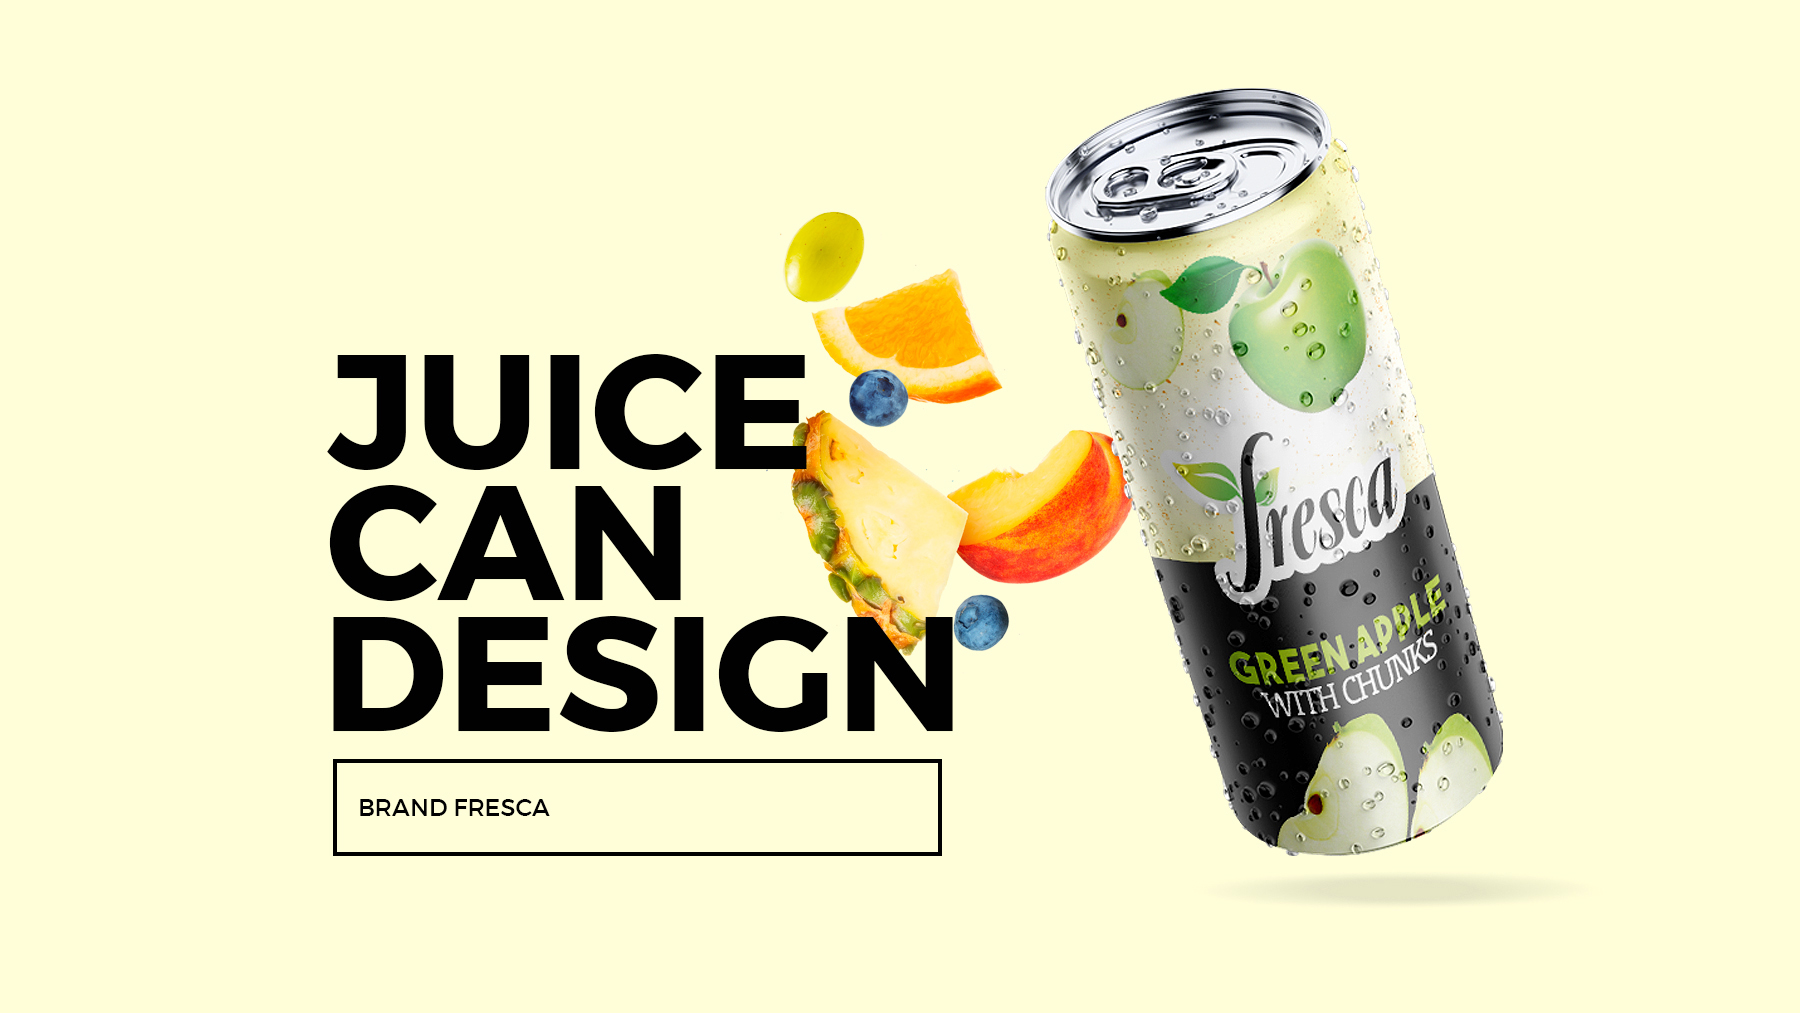 fresca green apple with chunks can juice label design case study